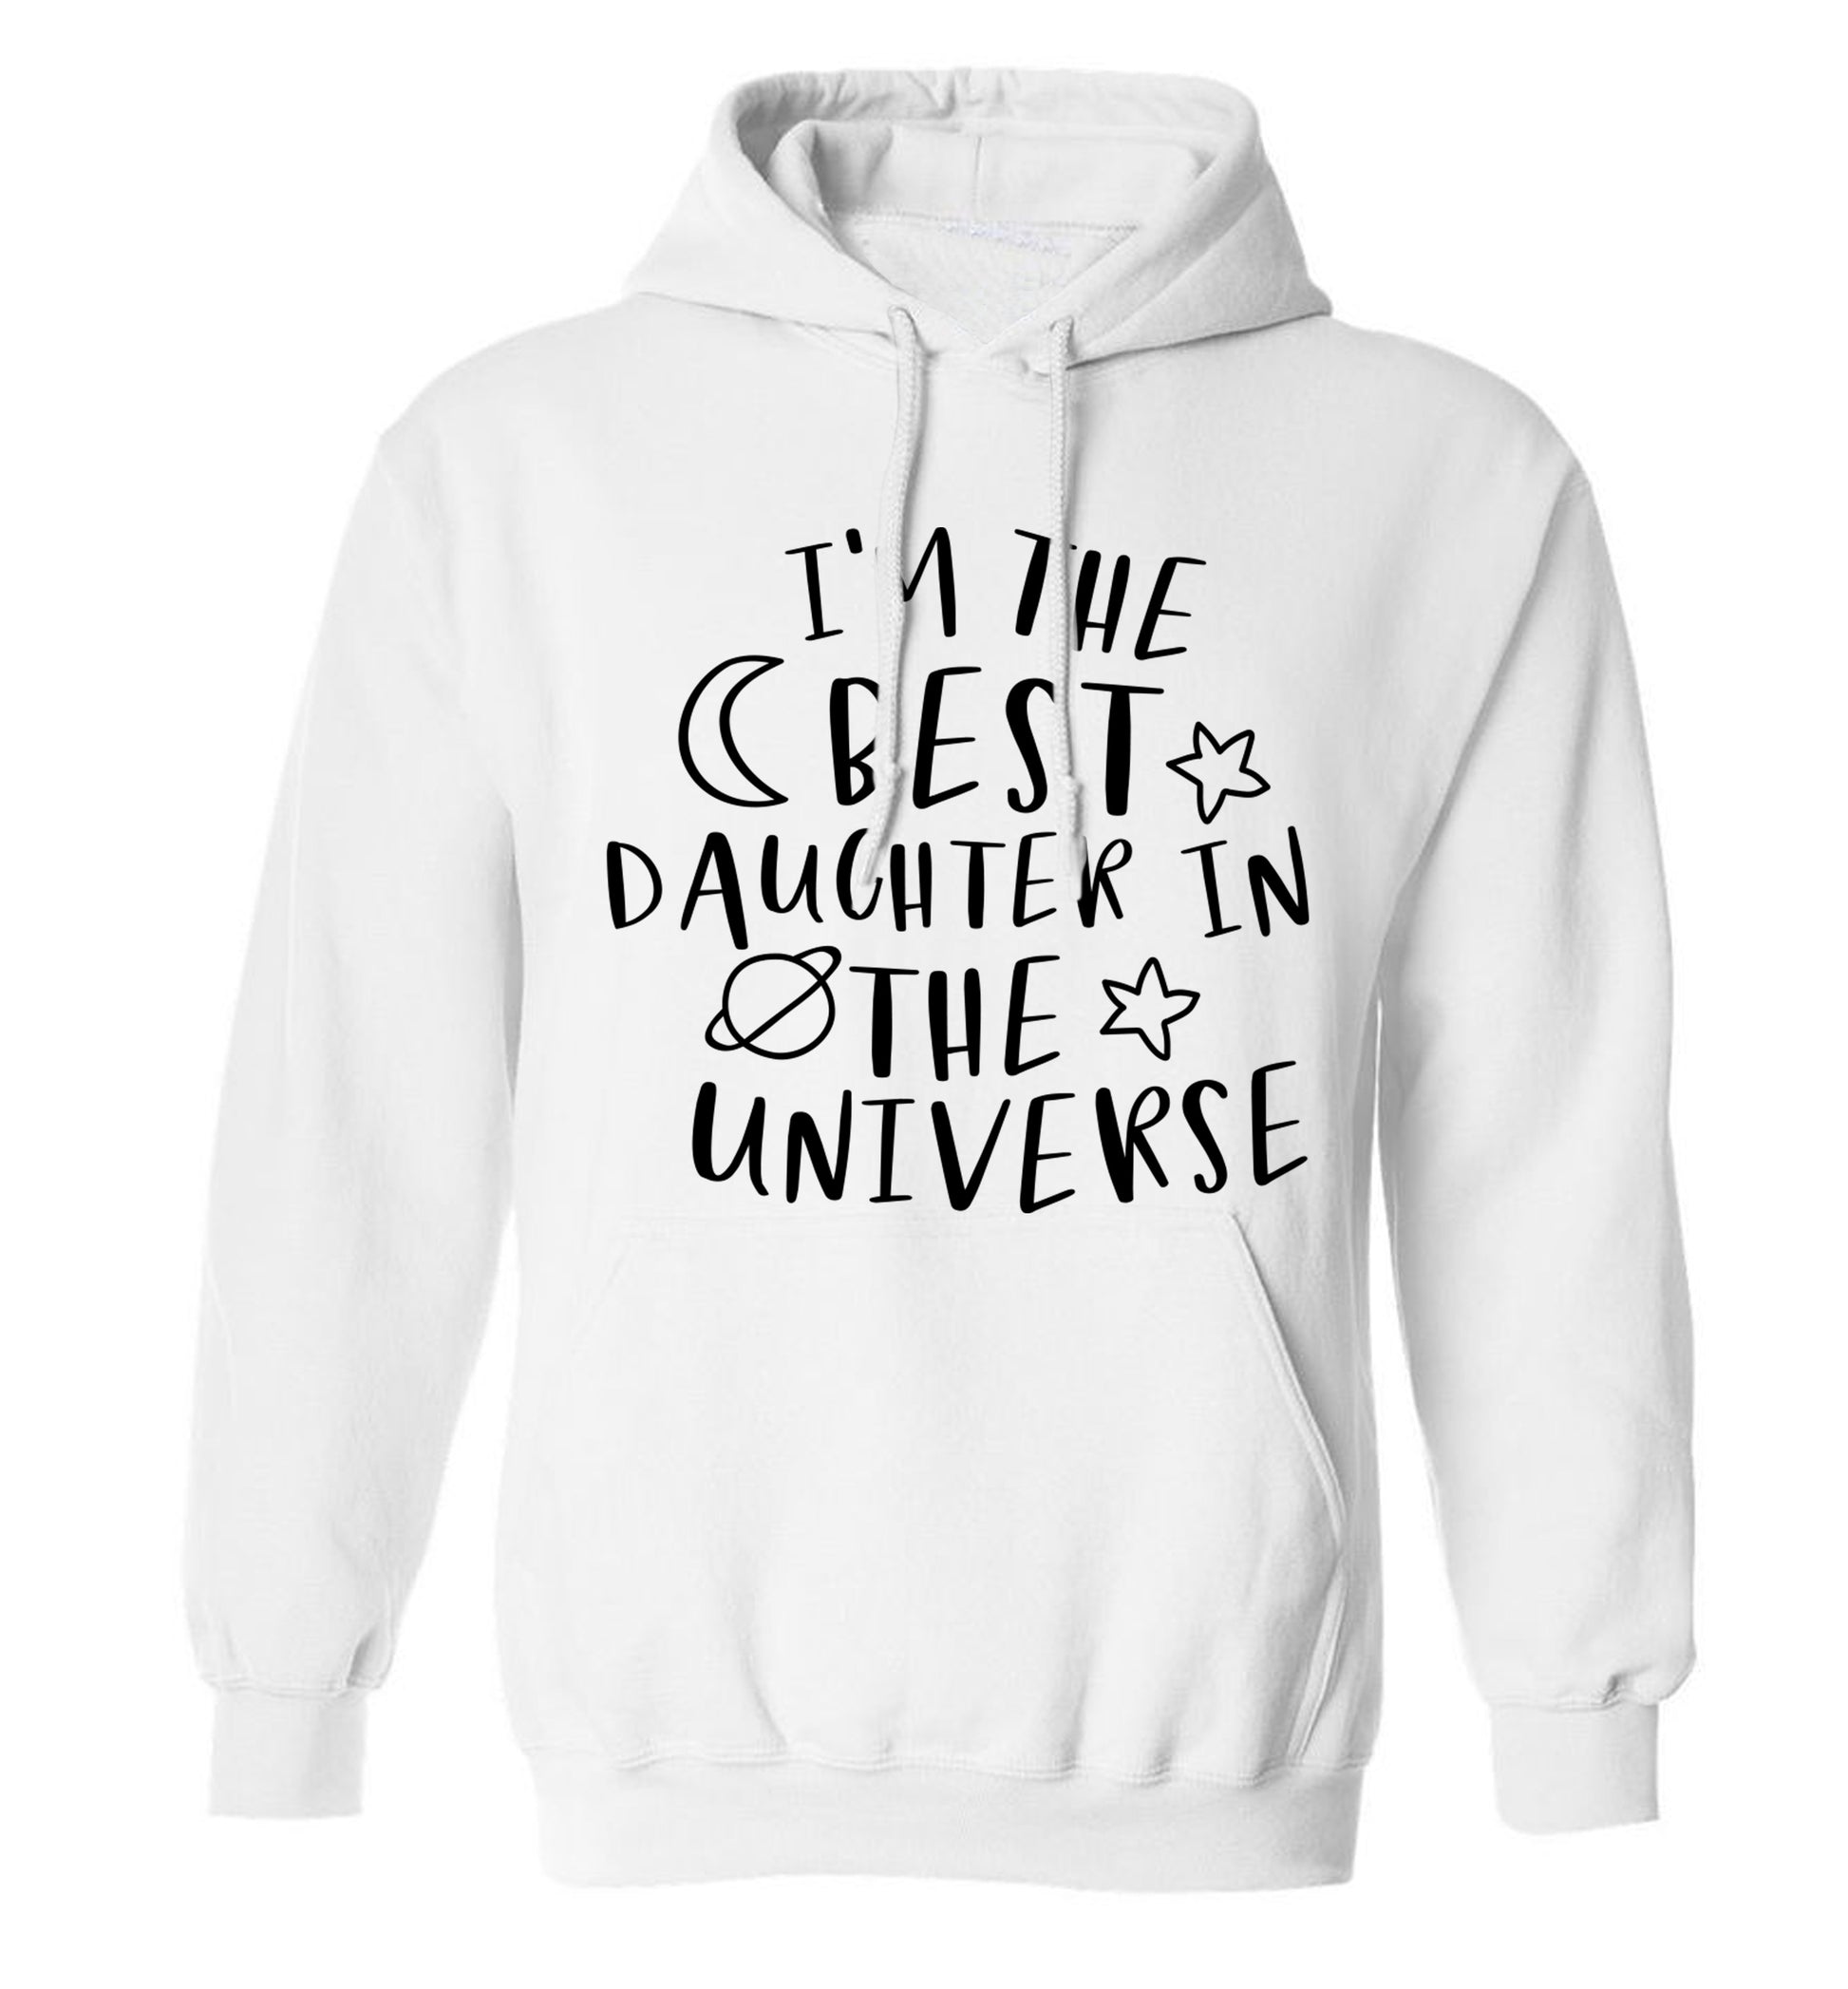 I'm the best daughter in the universe adults unisex white hoodie 2XL